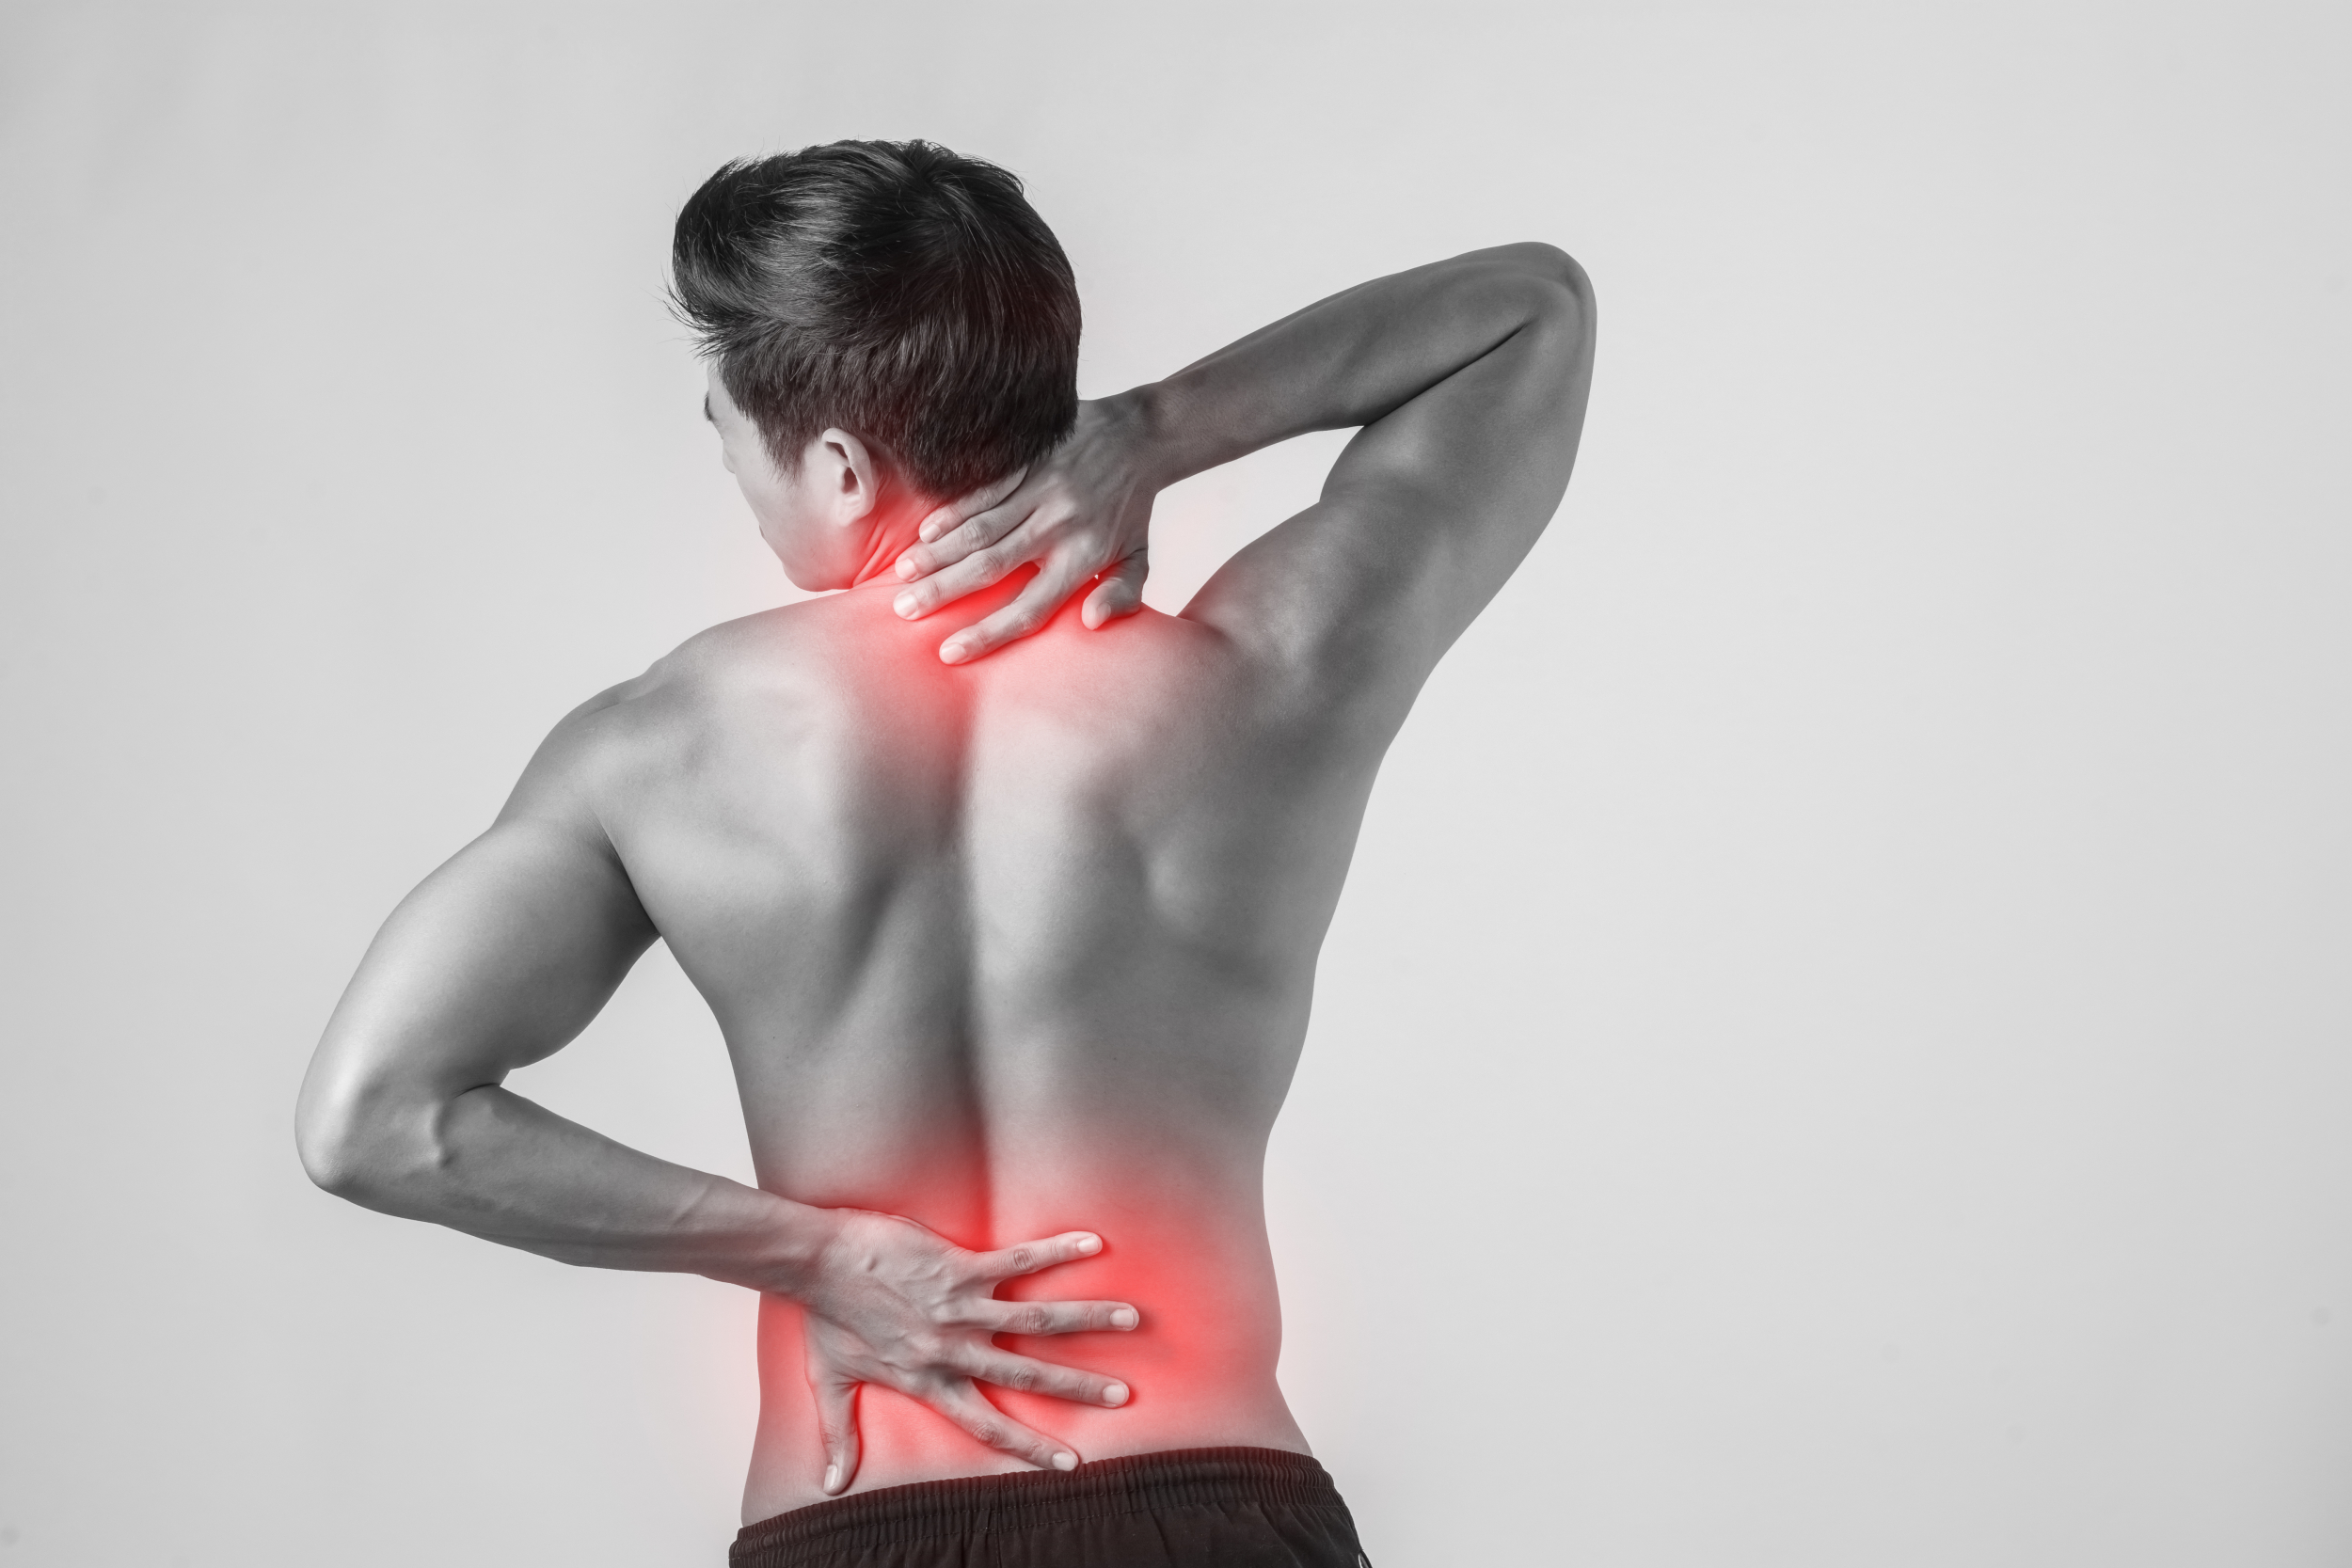 Sciatica Pain Relief Brace vs. Other Treatment Options: Which Works Best?